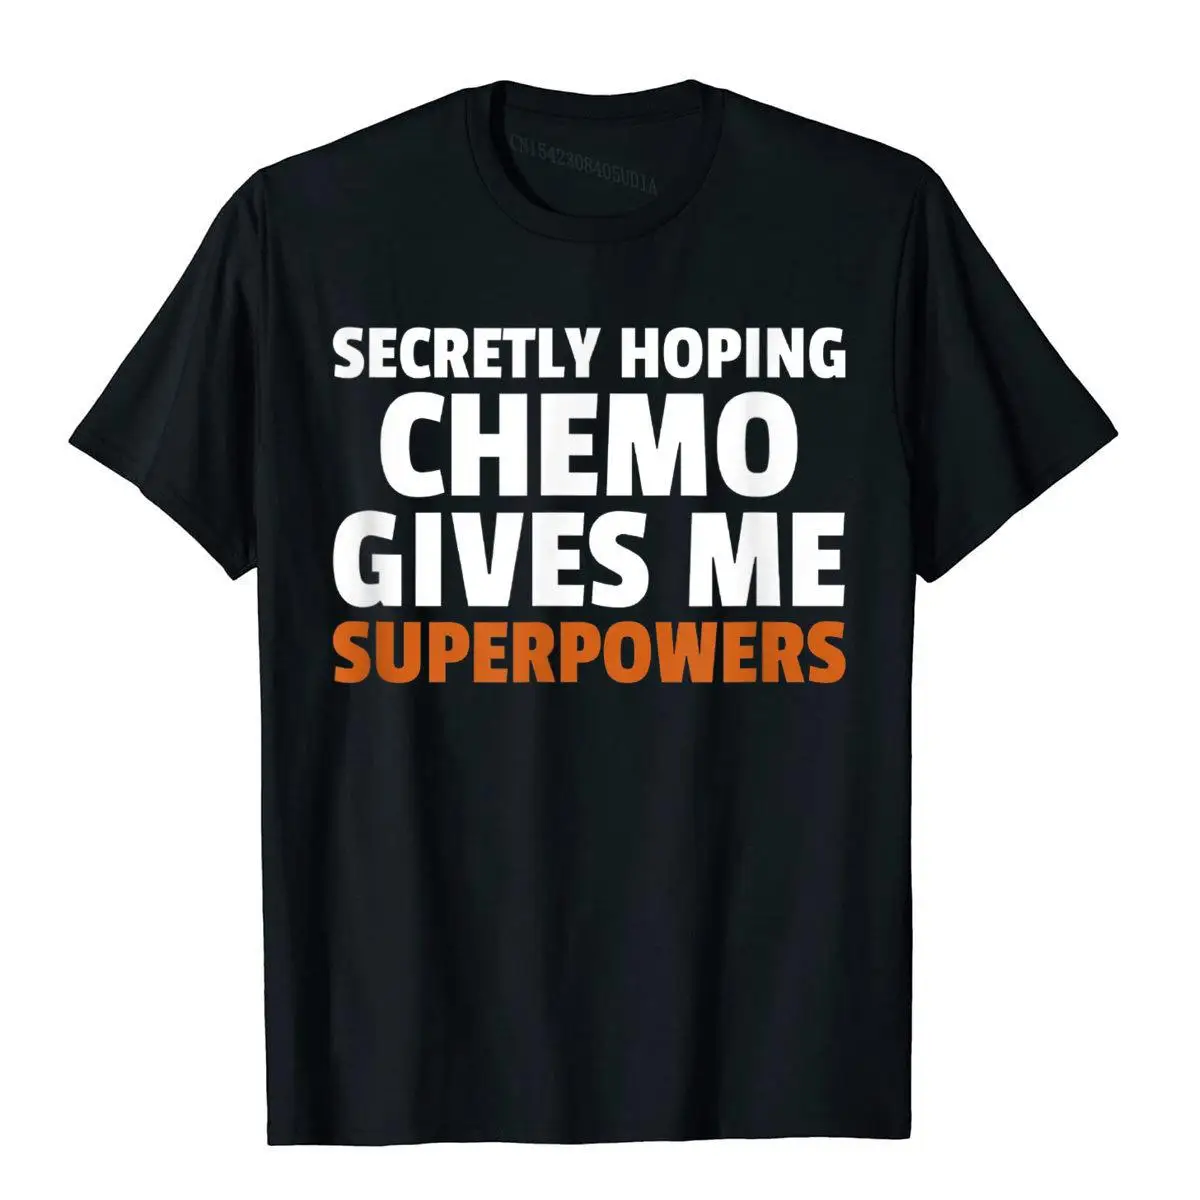 

Secretly Hoping Chemo Gives Me Superpowers Funny Cancer Beach Tops T Shirt For Students New Cotton Top T-Shirts Moto Biker